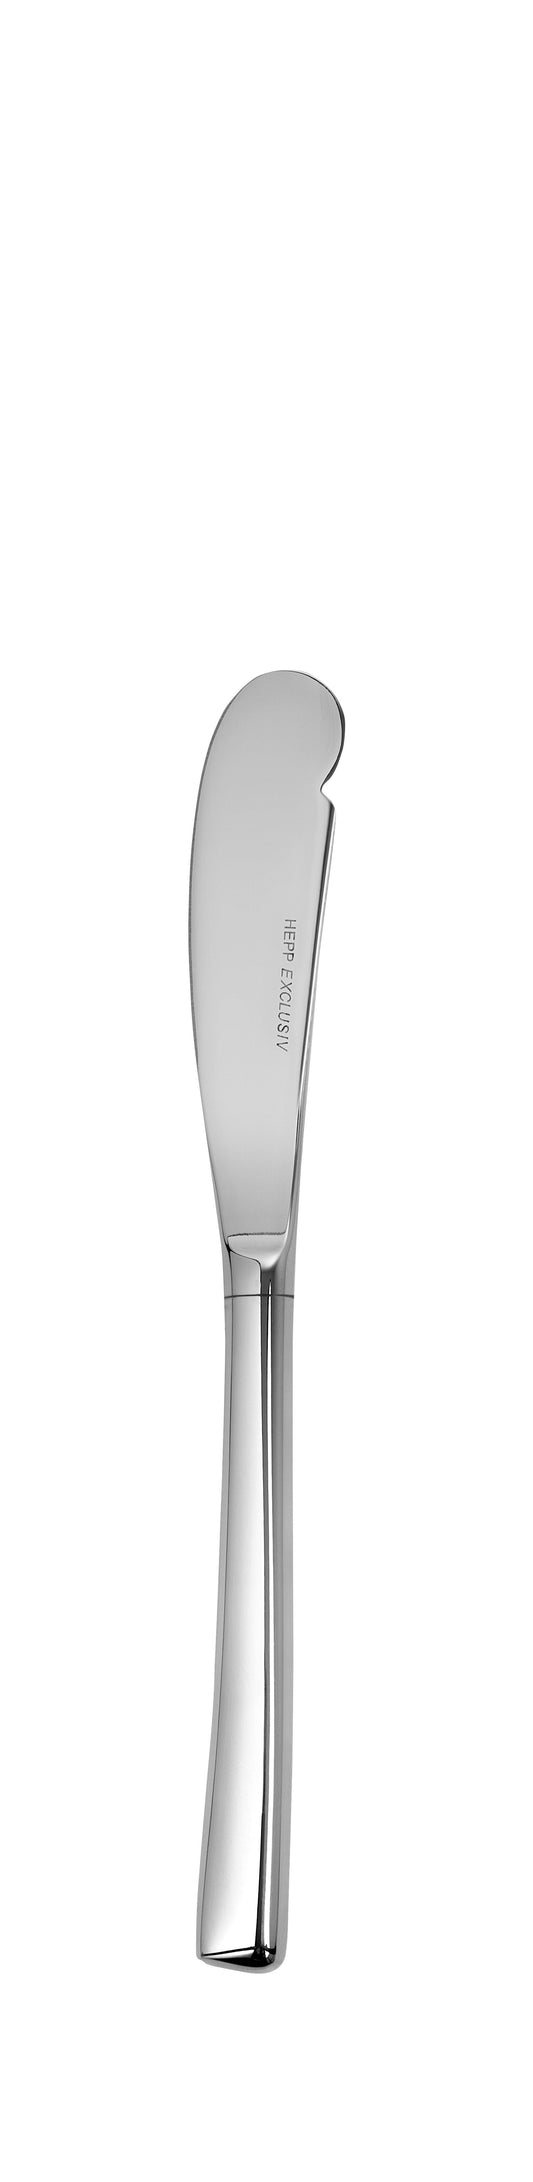 Bread and butter knife HH TRILOGY 175mm